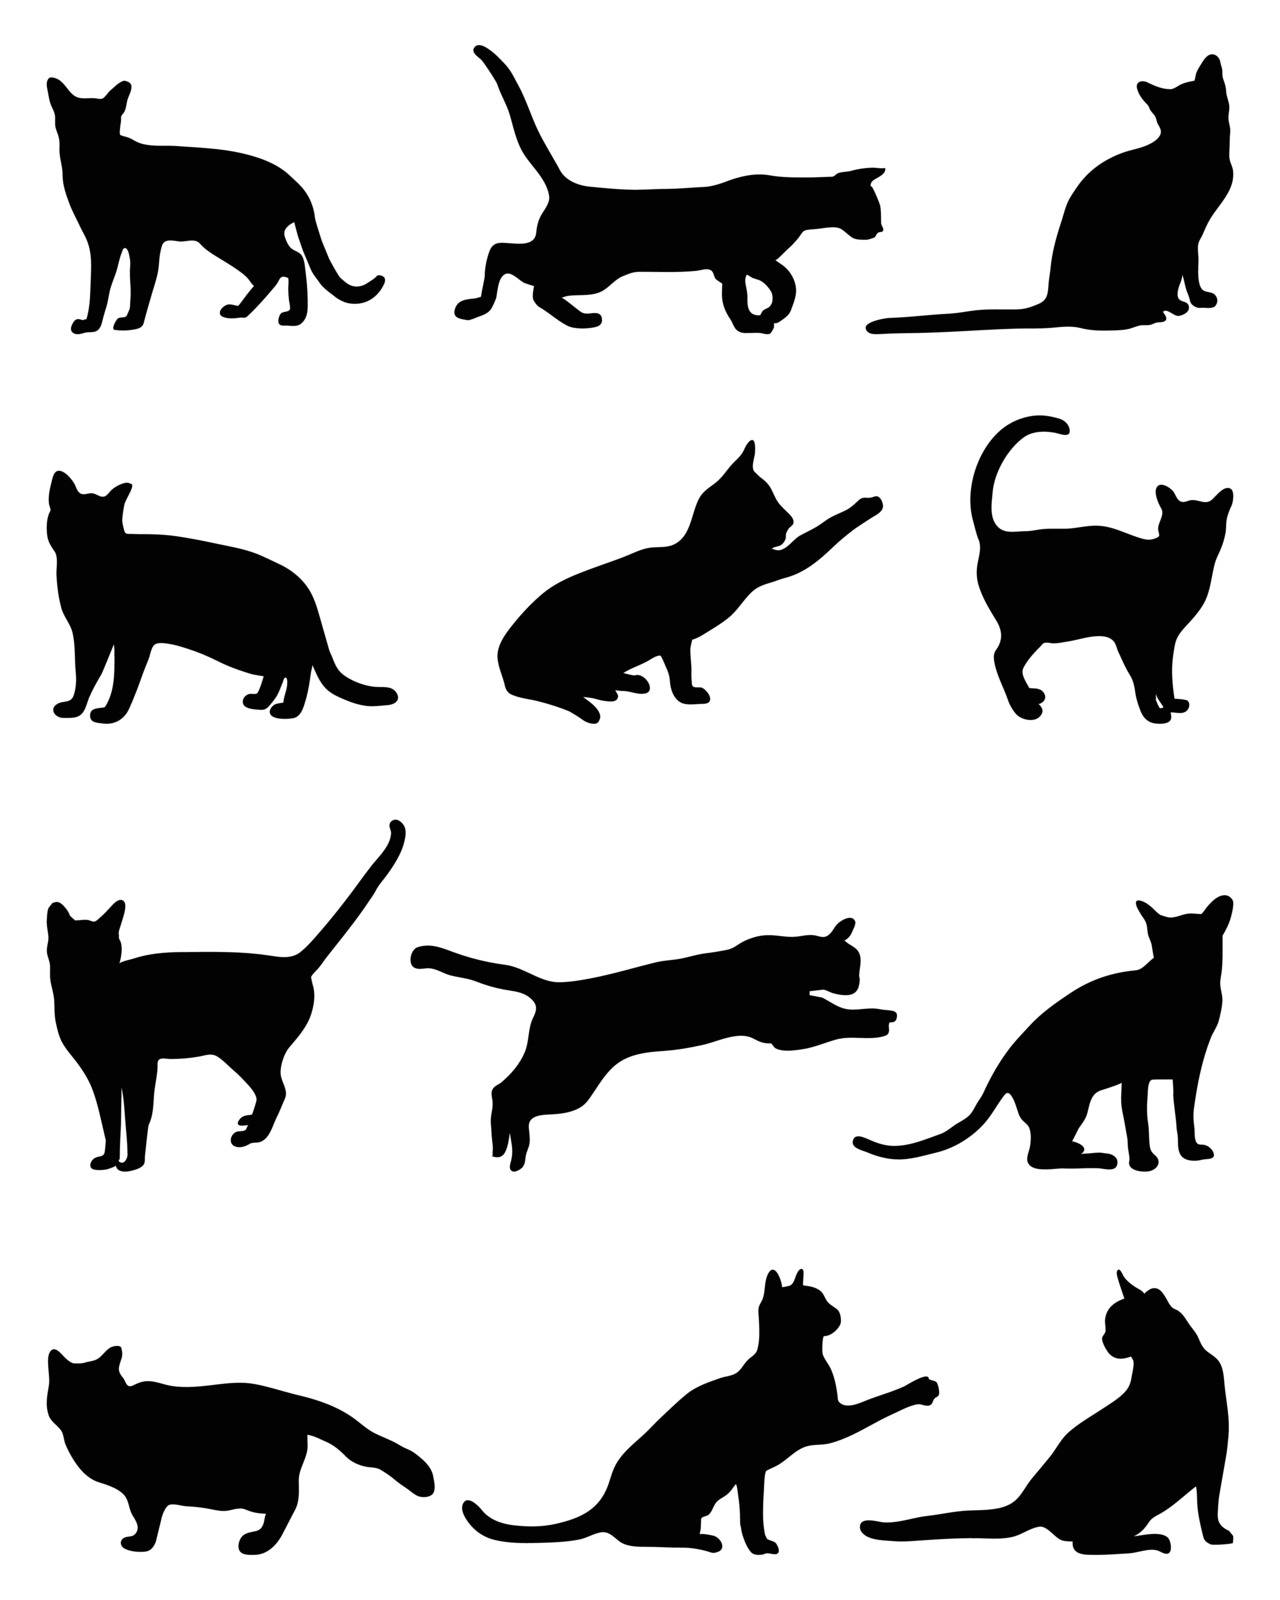 Black silhouettes of cats on a white background